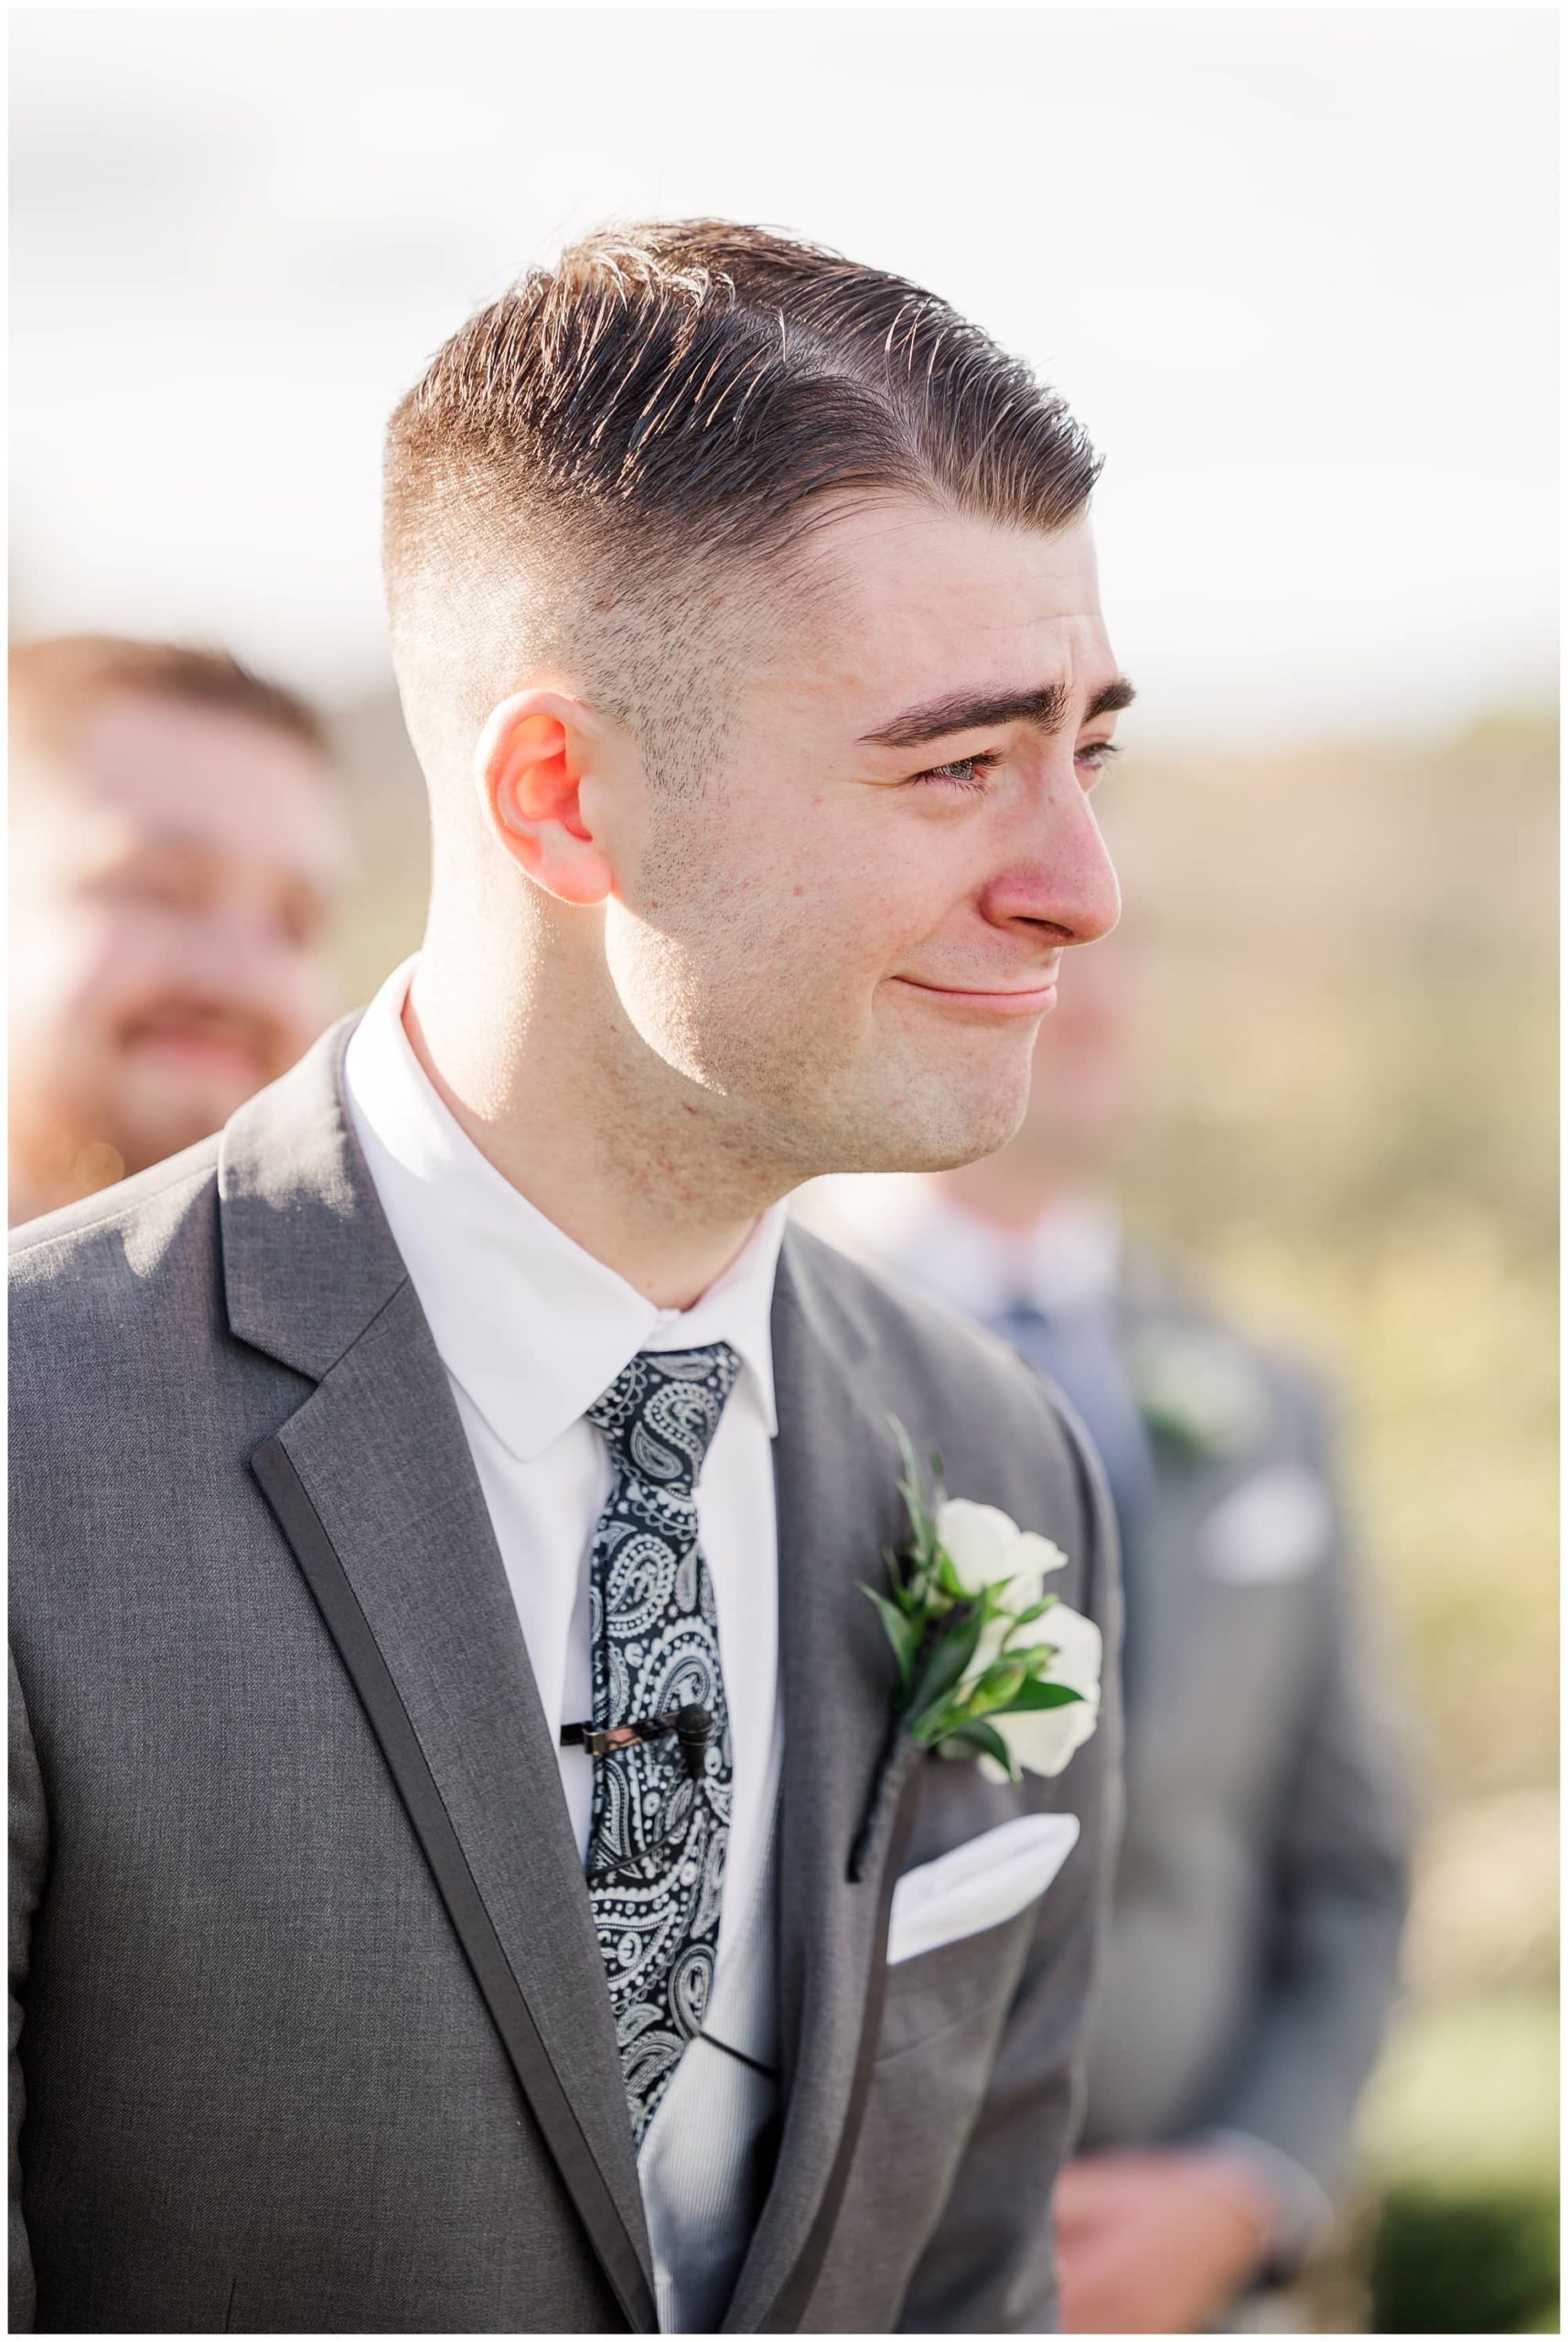 groom crying as he sees bride for the first time in wedding dress